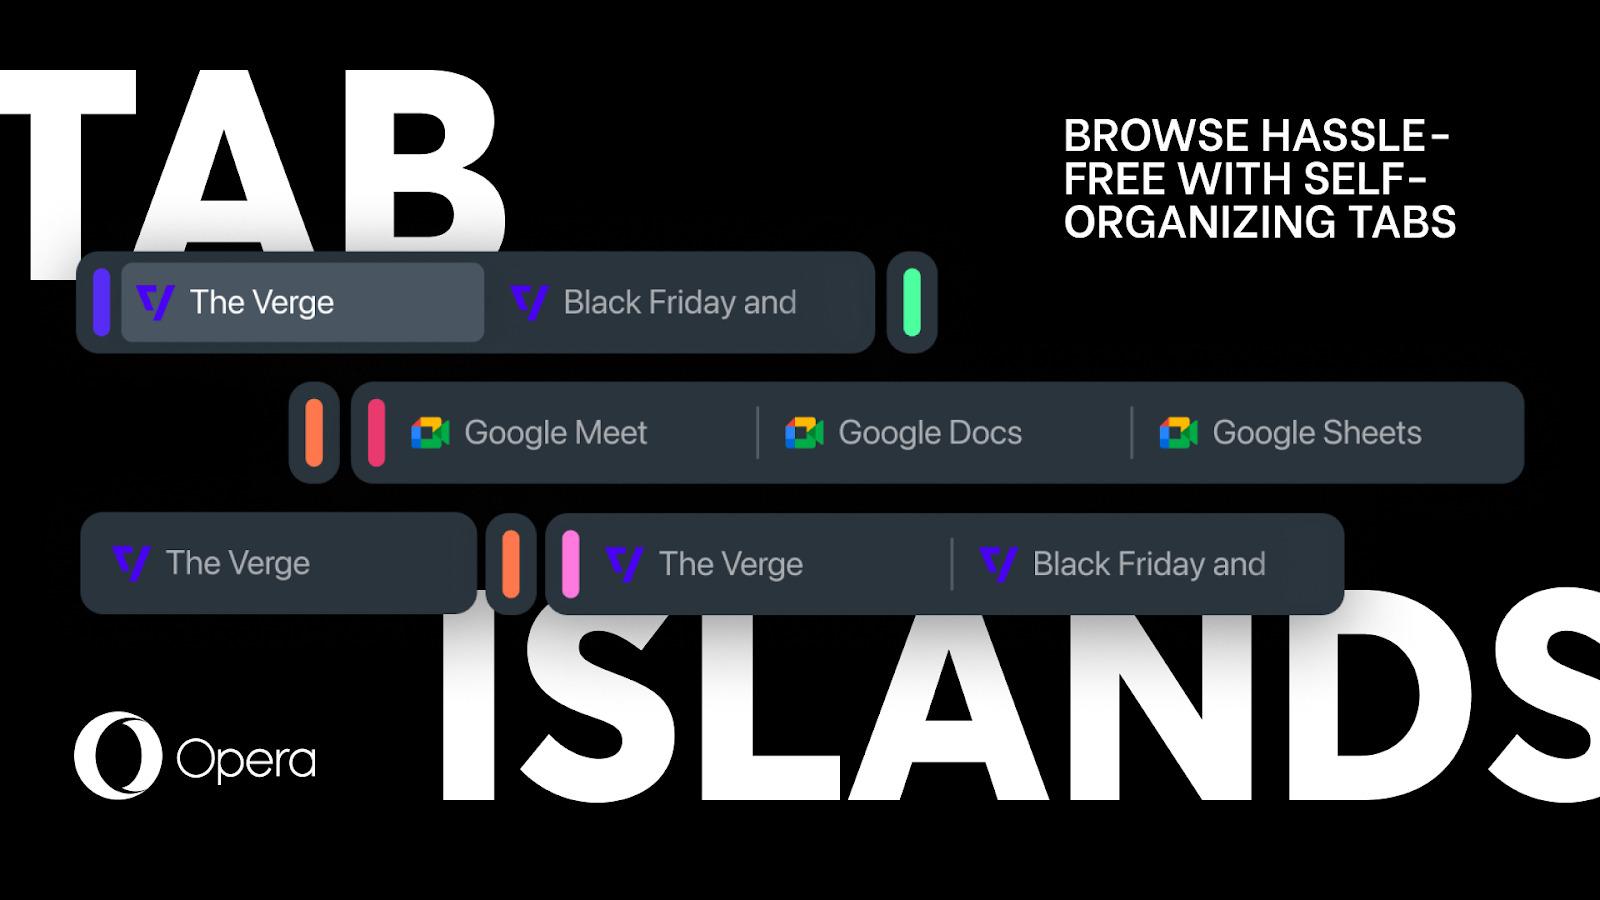 A selection of Tab Islands show the future capabilities of Opera One.